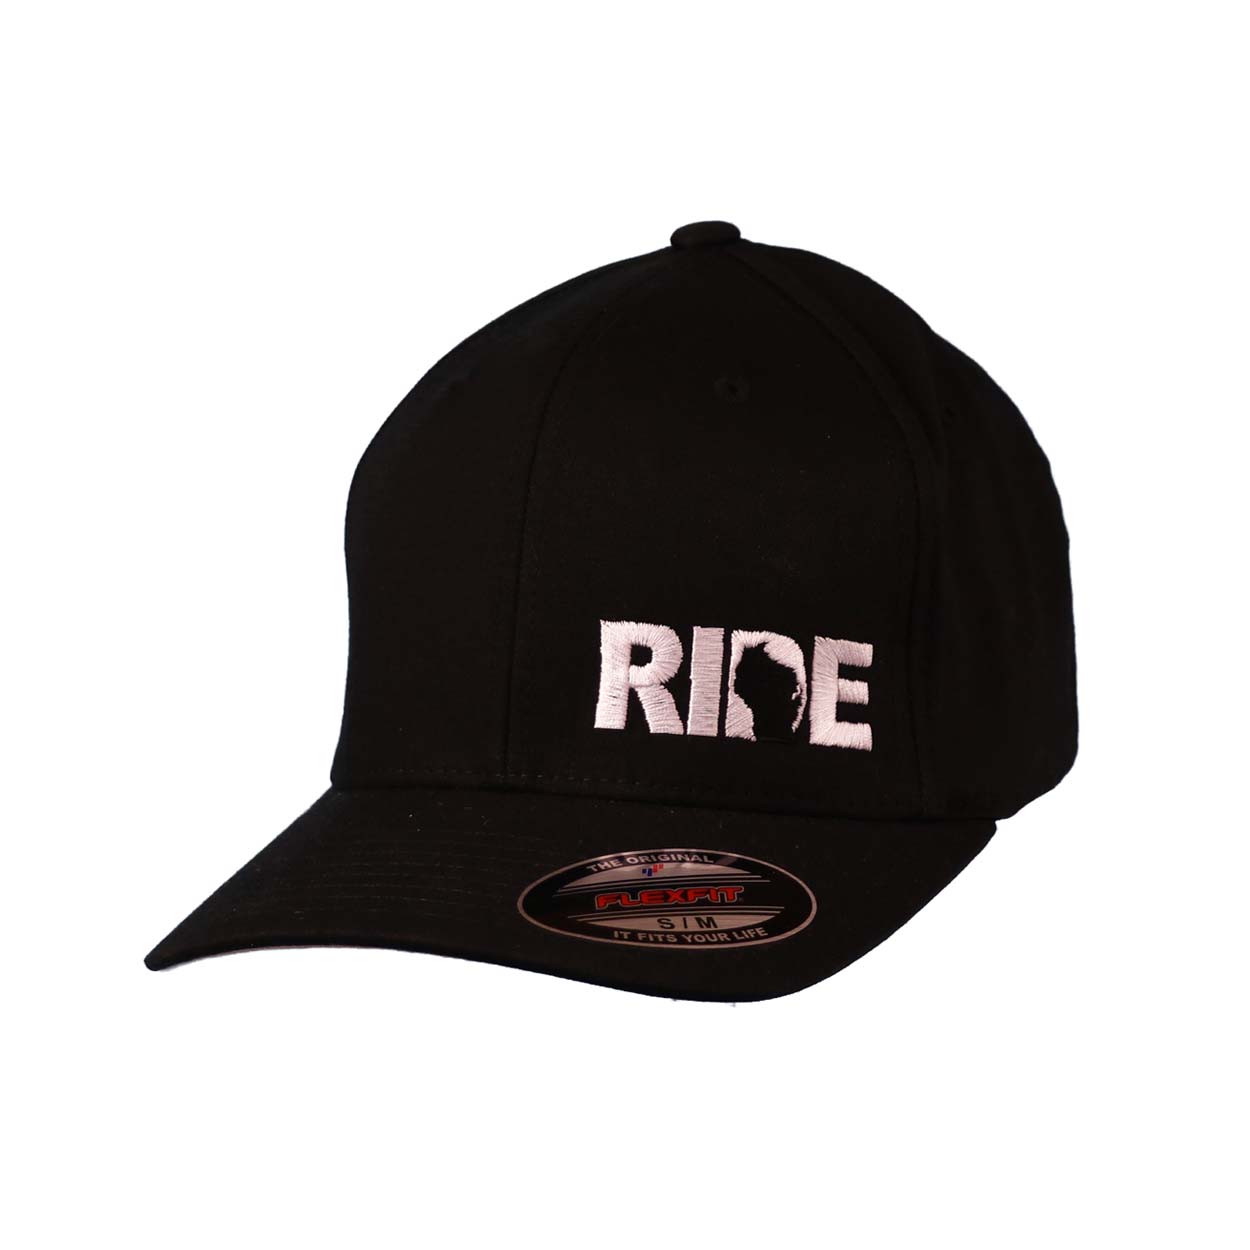 Ride Wisconsin Night Out Embroidered Flex Fit Hat Black/White